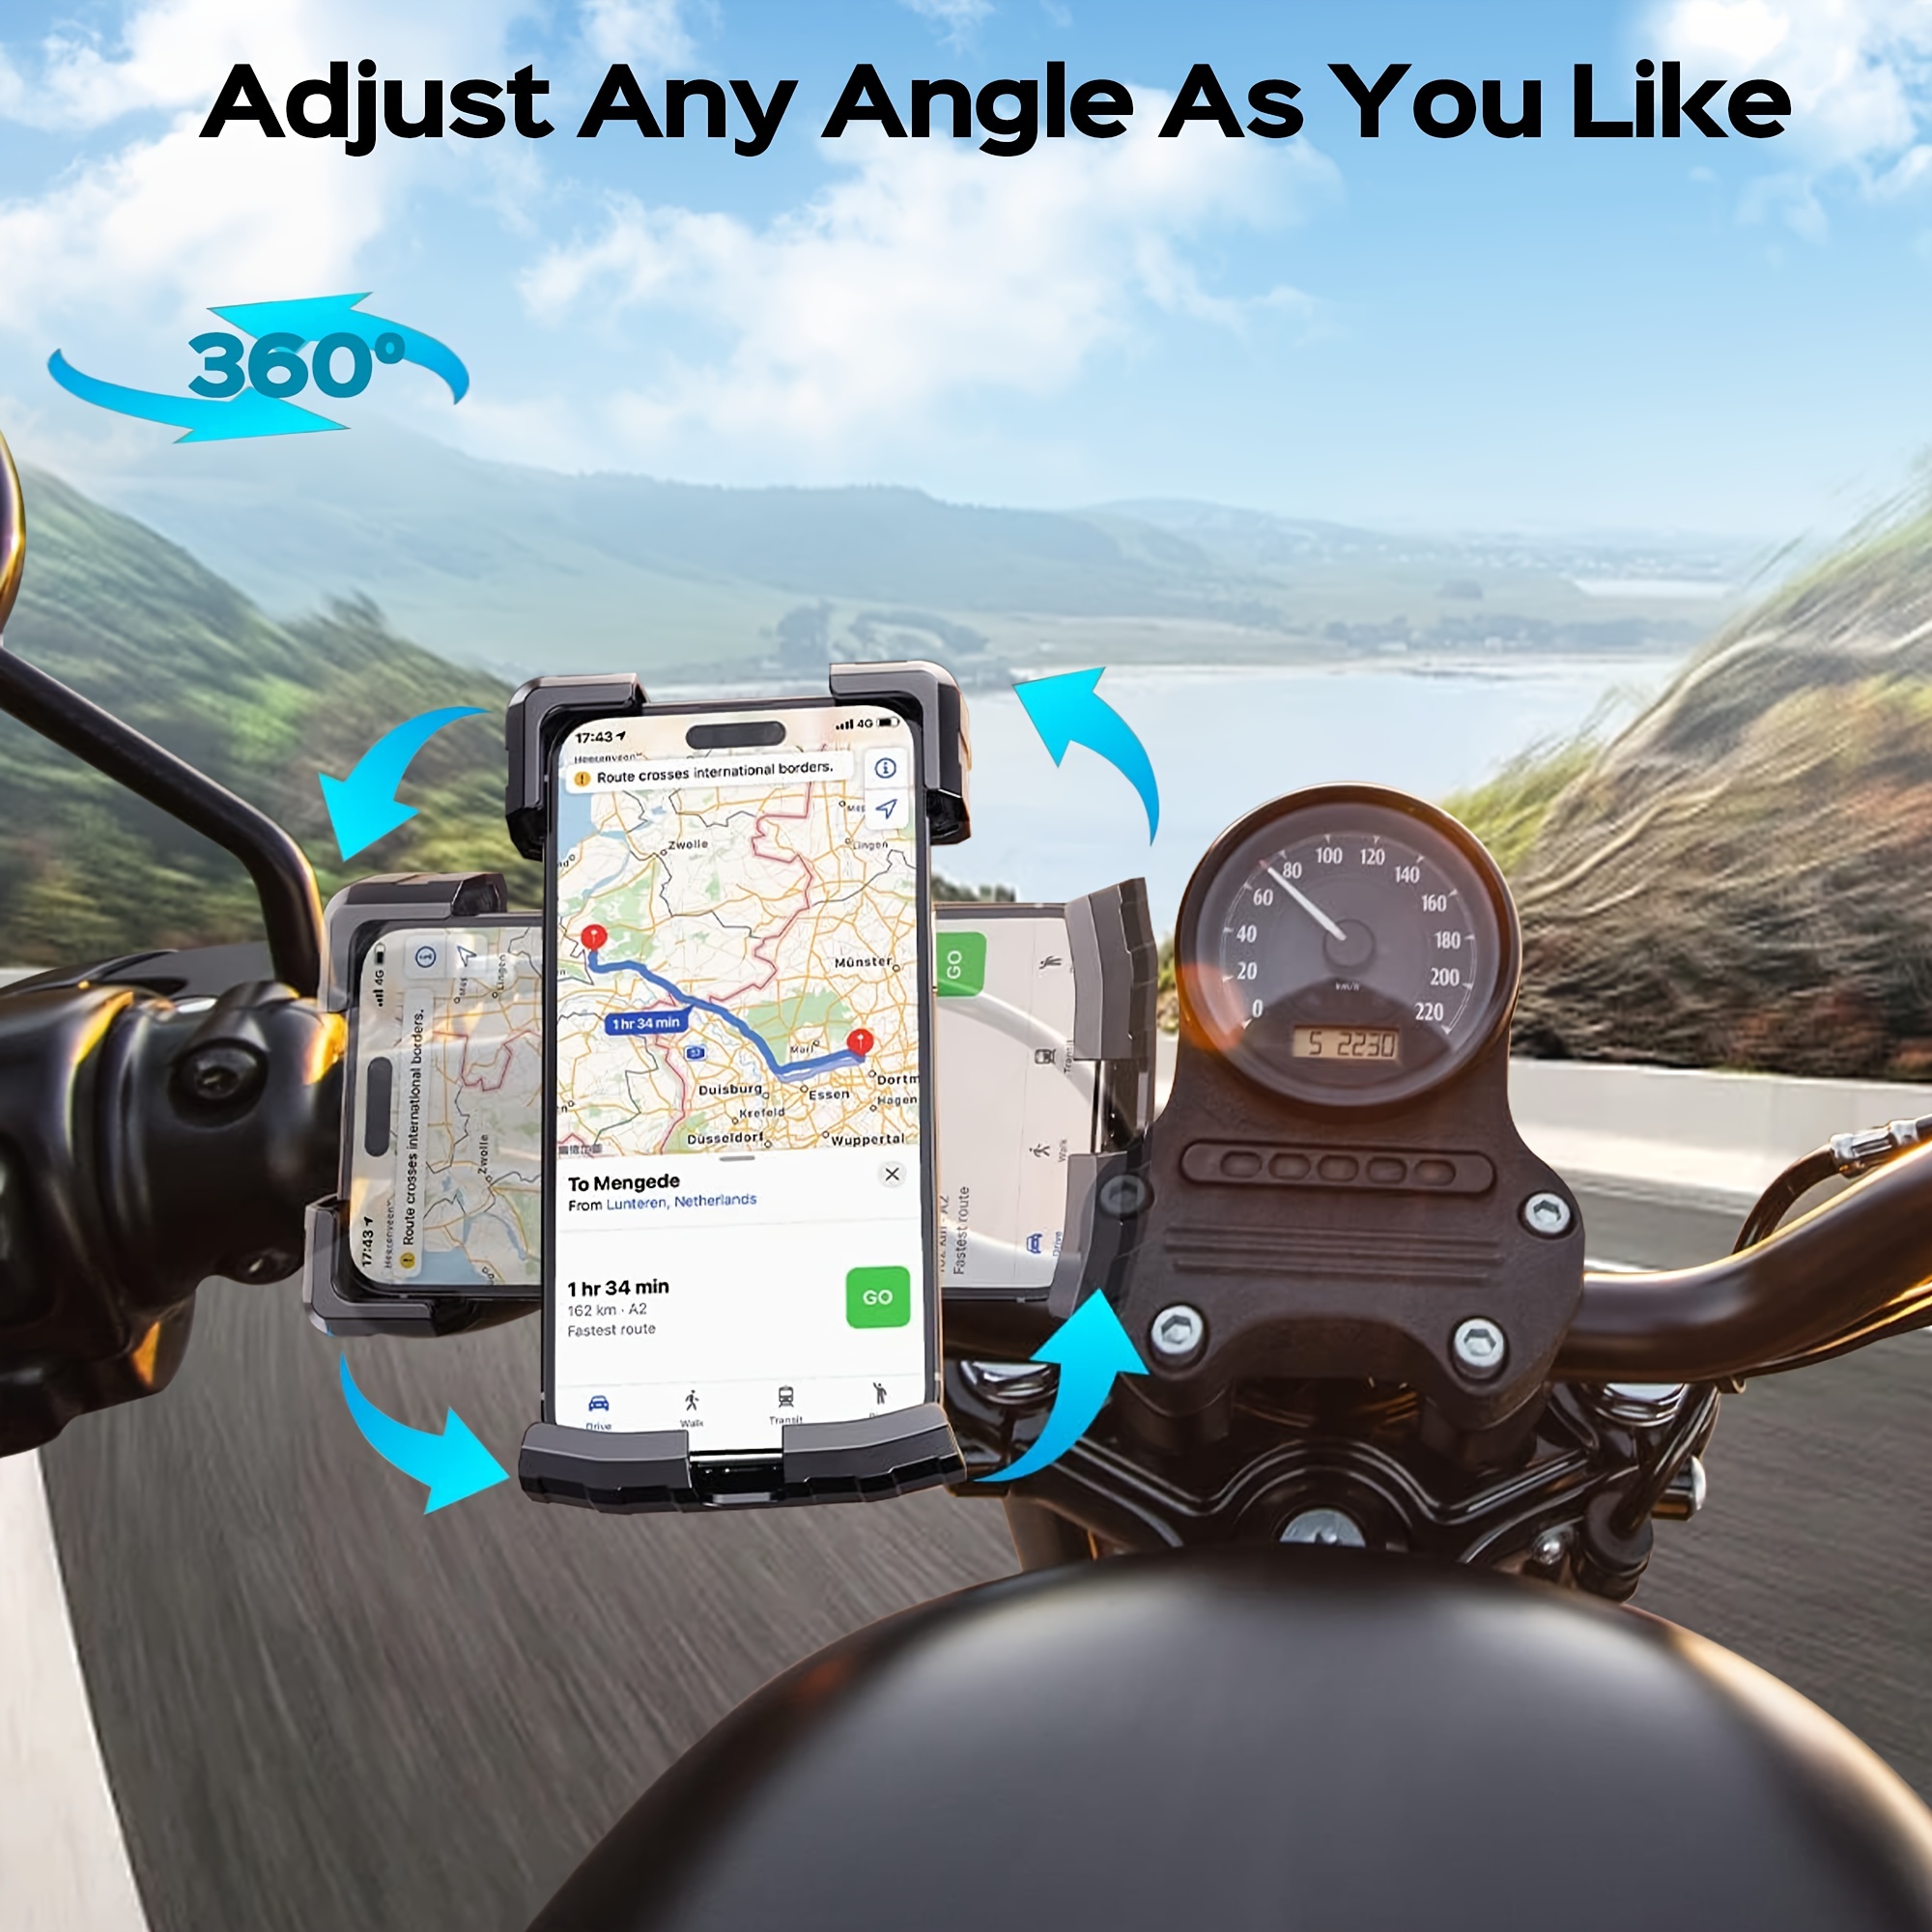 Motorcycle Phone Mount, Bike Phone Holder One Hand Operation ATV Scooter  Clip For IPhone 14 Pro Max /13/12/11, Galaxy S10 And 4.7- 6.8 Cellphone